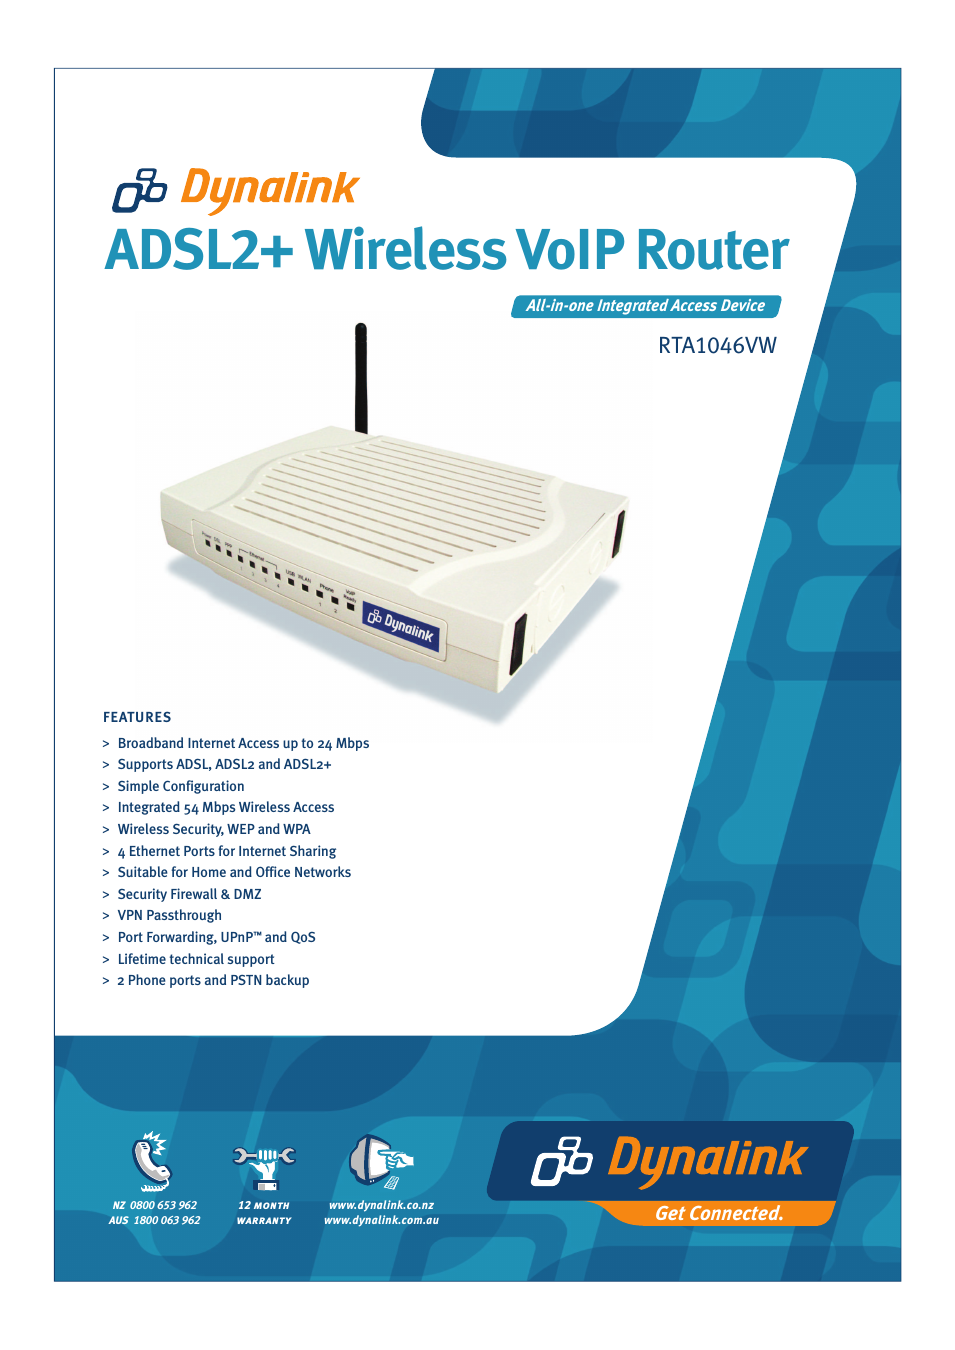 ADSL2+ Wireless VoIP Router RTA1046VW